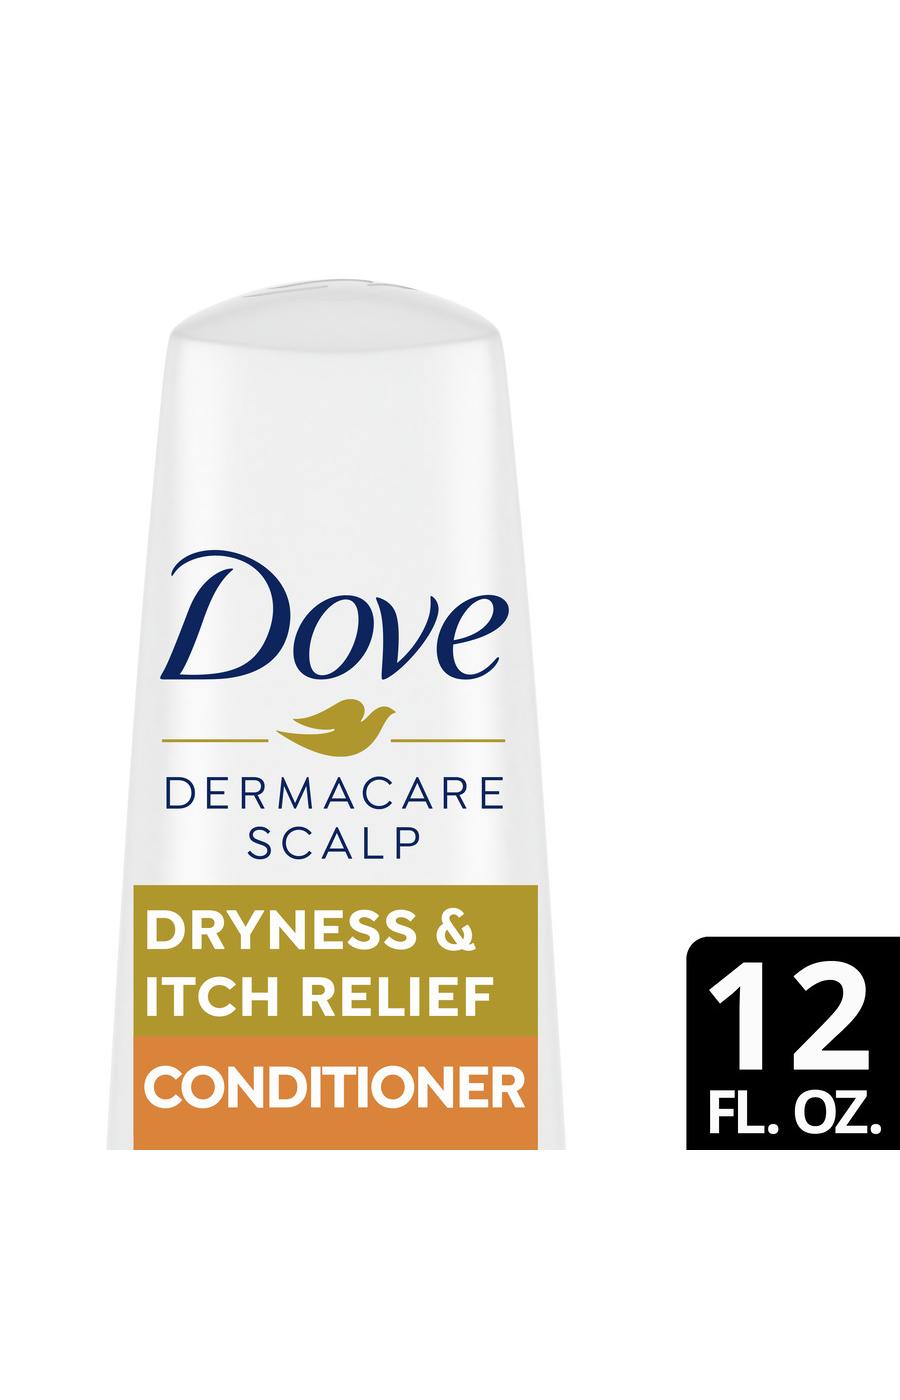 Dove DermaCare Scalp Anti-Dandruff Conditioner - Dryness & Itch Relief; image 2 of 3